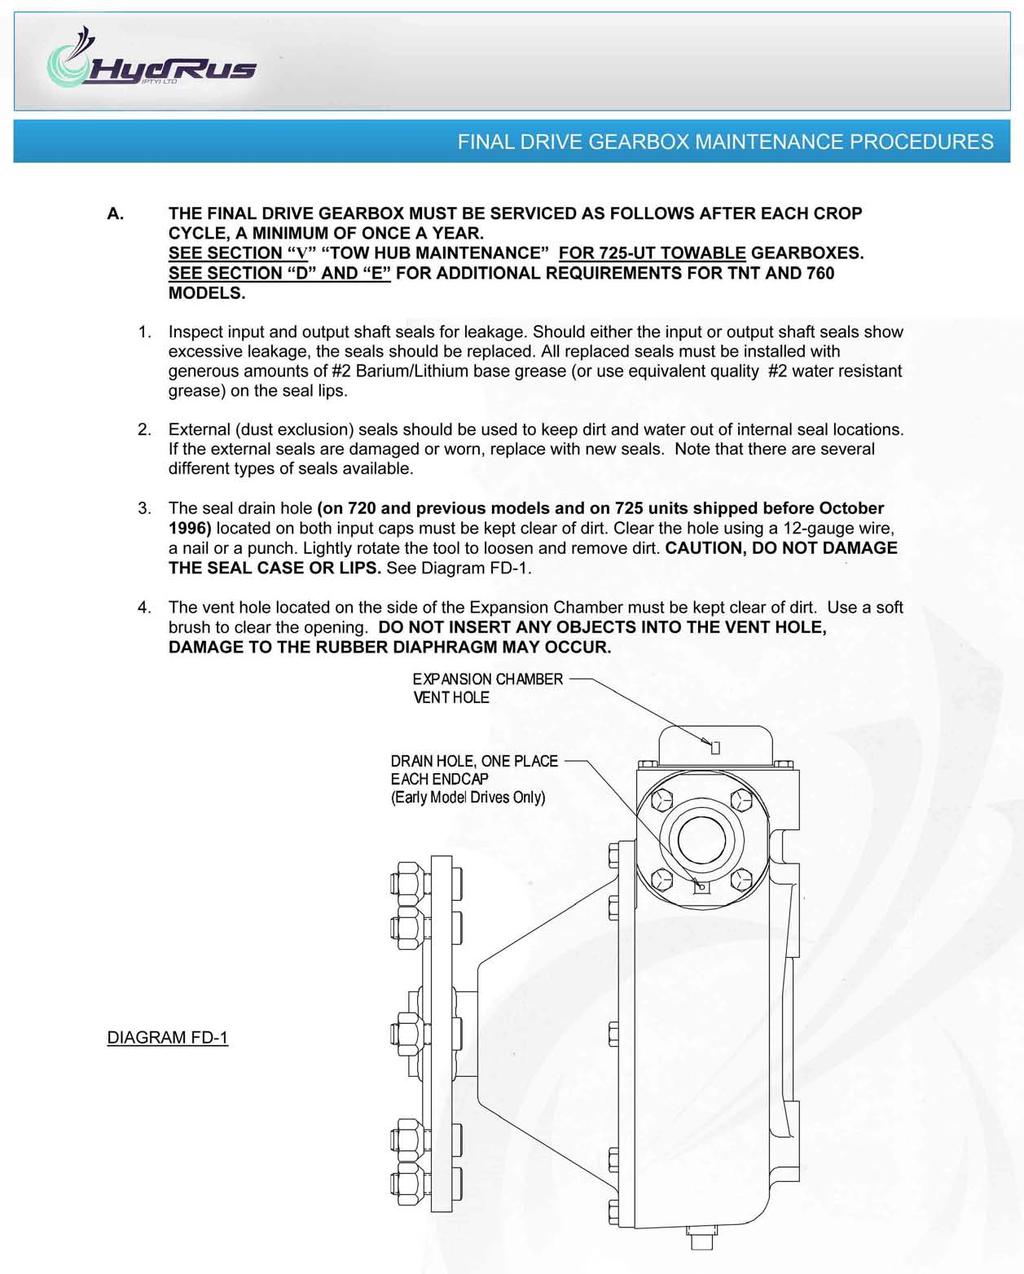 FINAL DRIVE GEARBOX MAINTENANCE PROCEDURES A. THE FINAL DRIVE GEARBOX MUST BE SERVICED AS FOLLOWS AFTER EACH CROP CYCLE, A MINIMUM OF ONCE A YEAR.